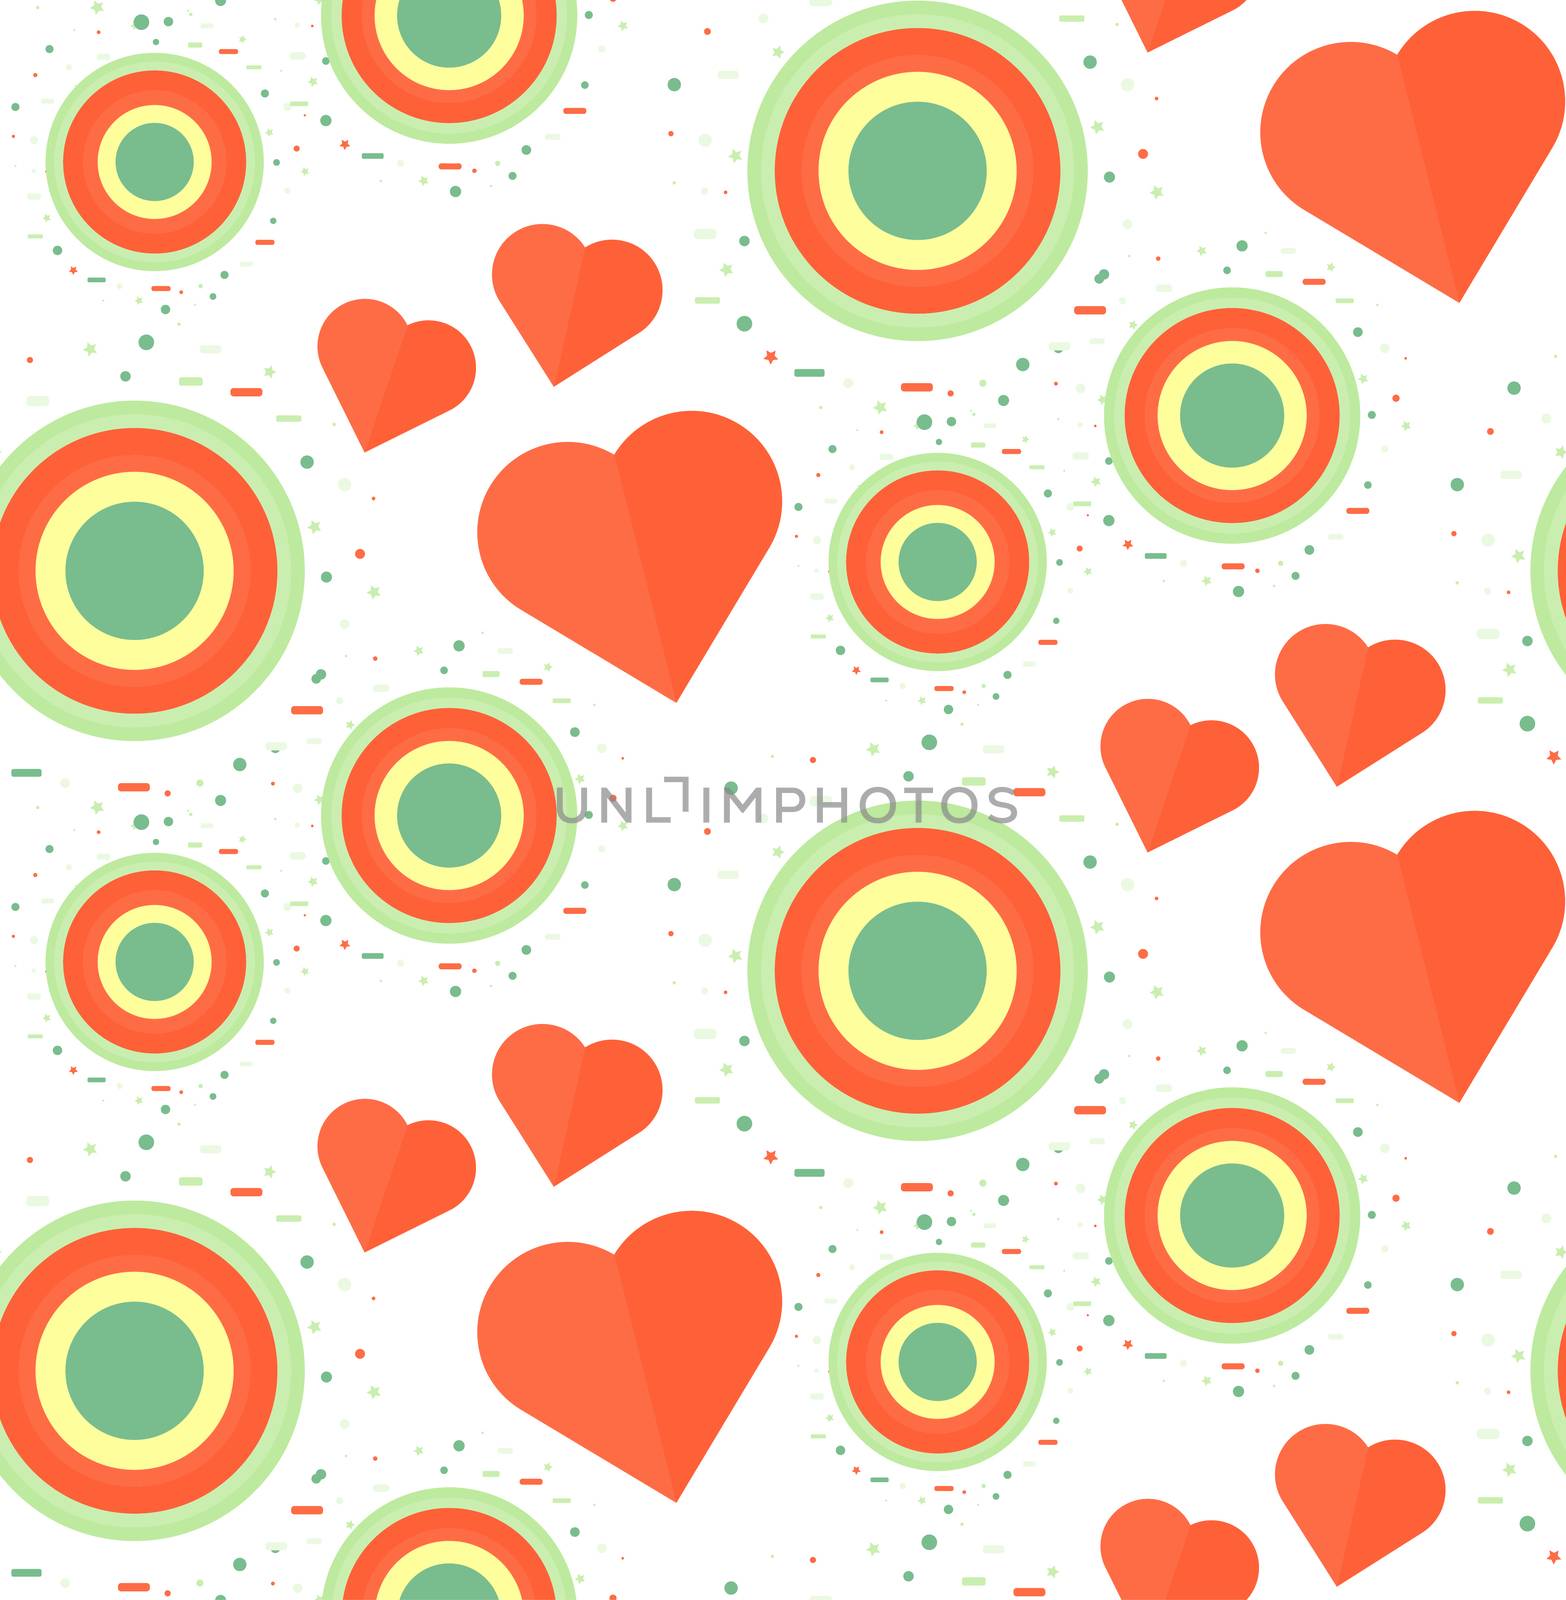 Vintage Seamless Romantic Pattern for Wrap, Print, Fabric, Textile, Greeting Card. Ornament with heart and circle for clothes and wallpaper, stickers and mosaic. Wedding retro background. Vector